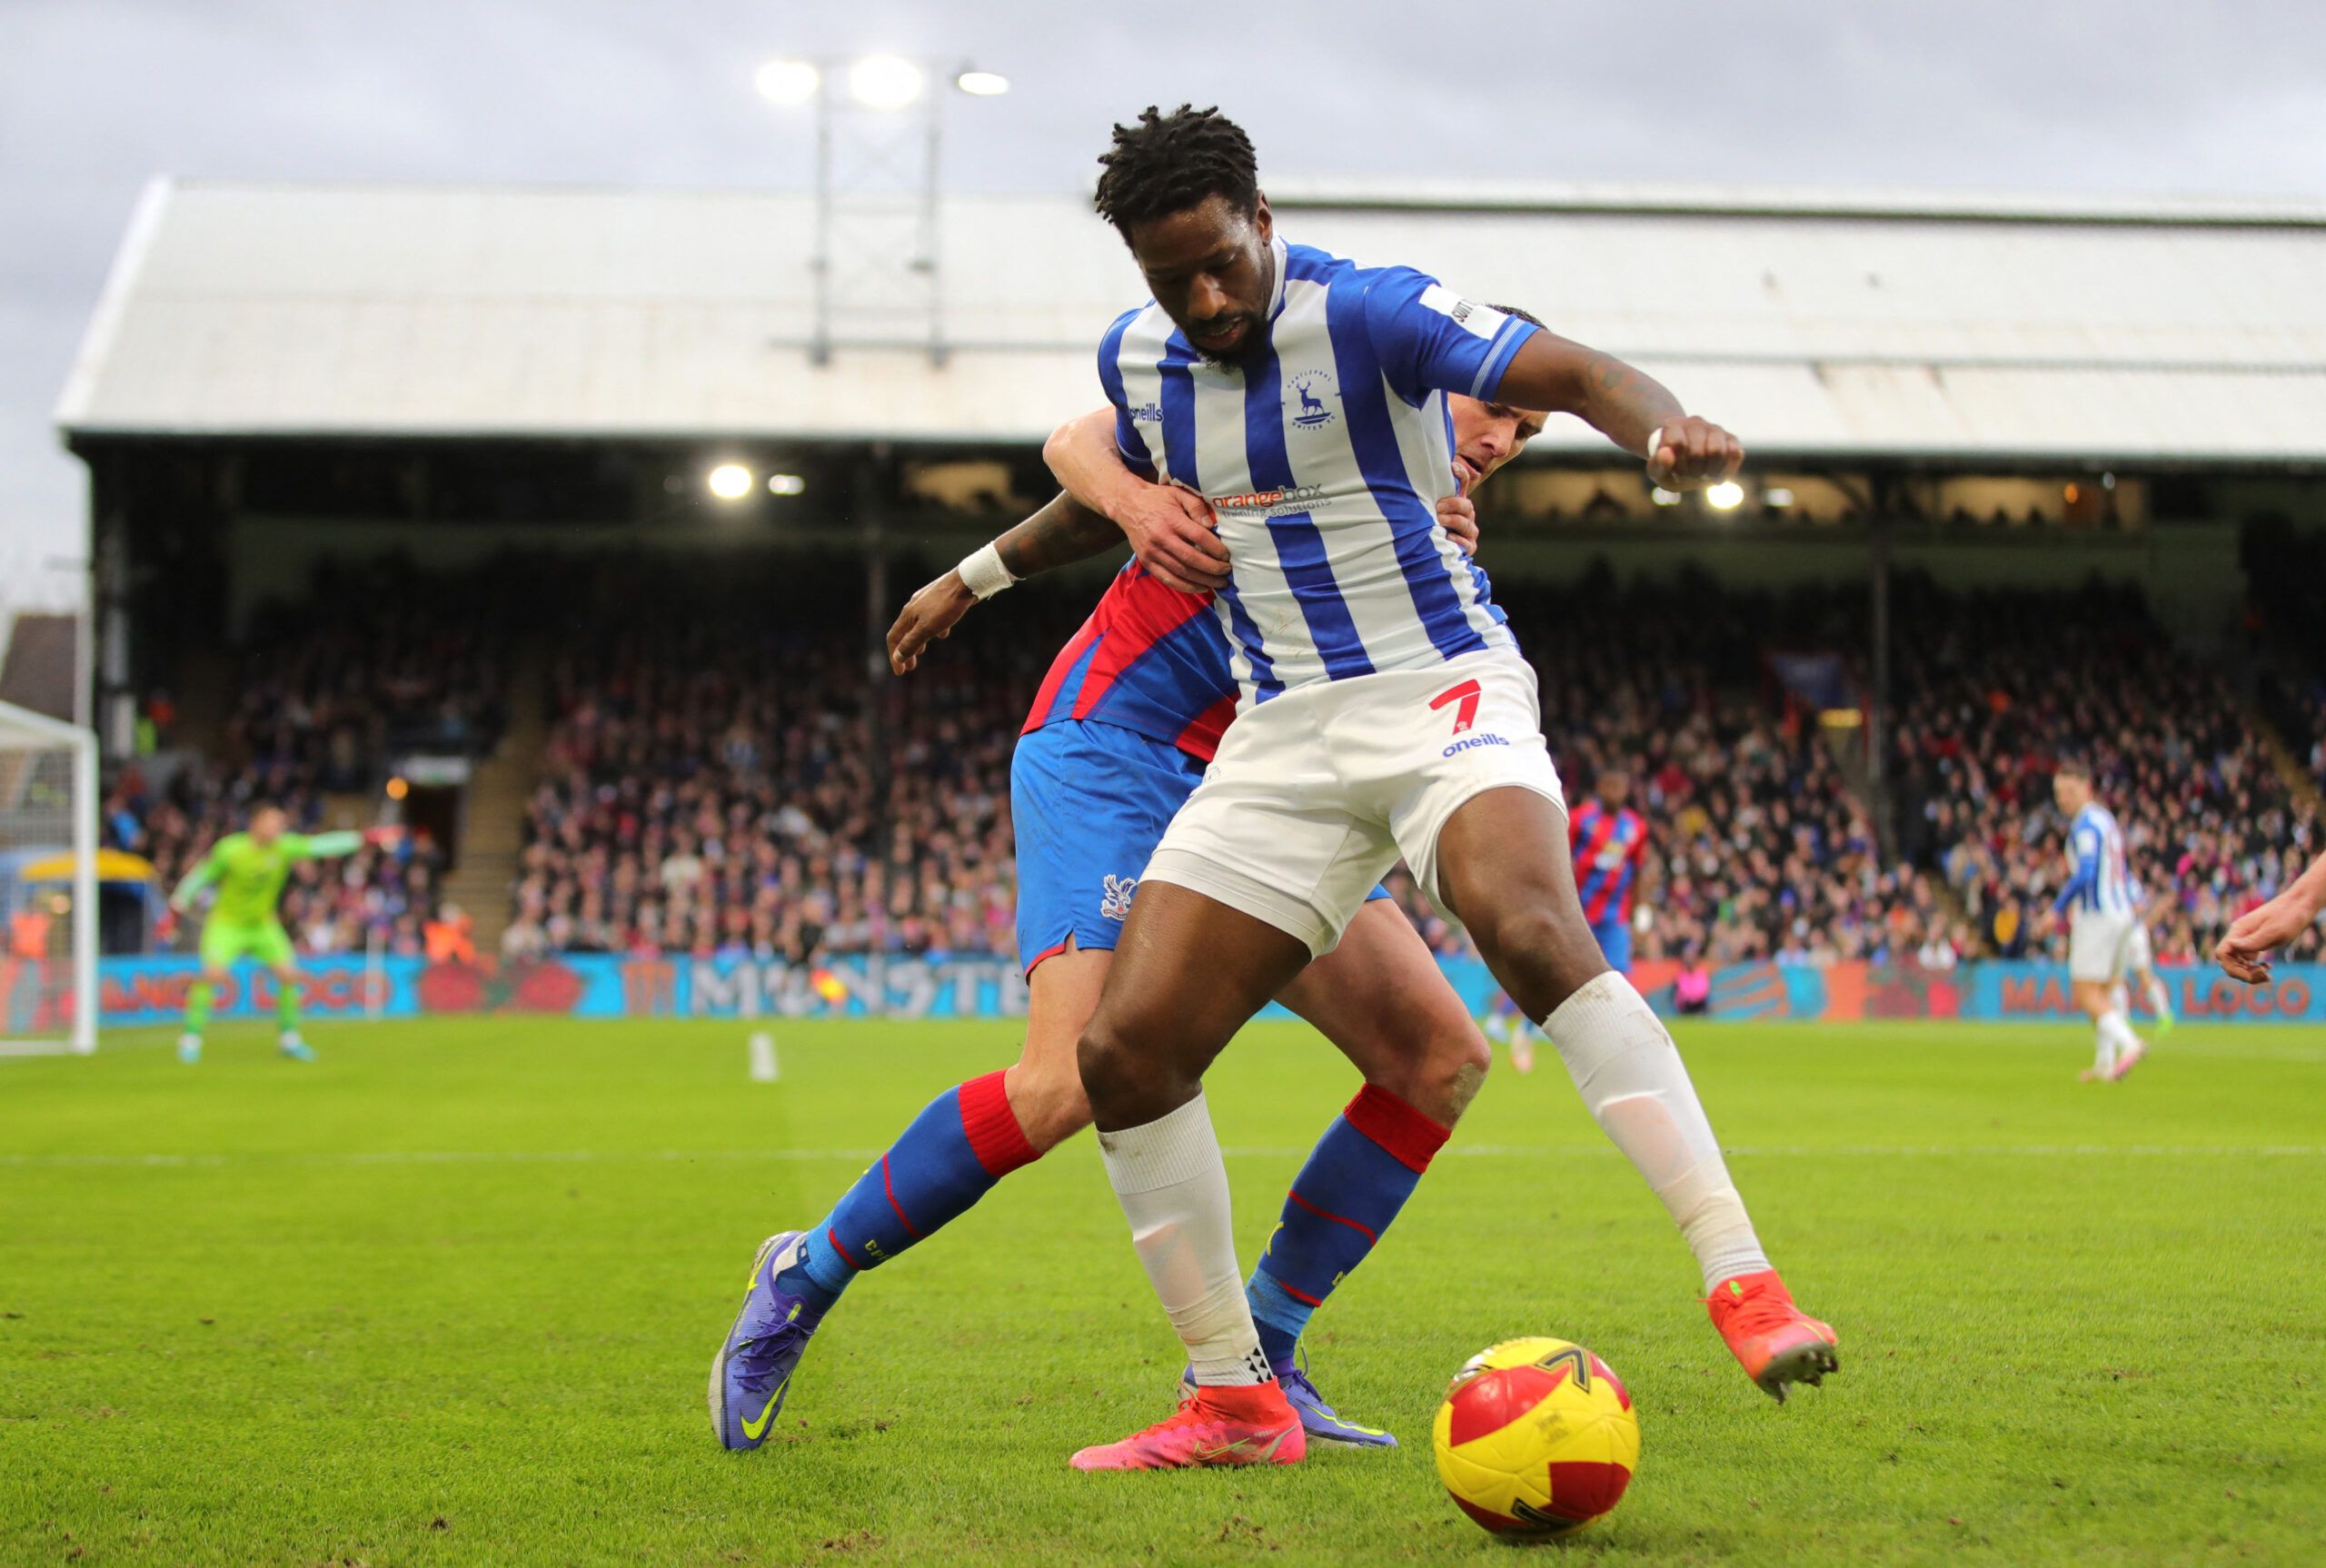 Soccer Football - FA Cup - Fourth Round - Crystal Palace v Hartlepool United - Selhurst Park, London, Britain - February 5, 2022 Hartlepool United's Omar Bogle in action with Crystal Palace's Martin Kelly REUTERS/Chris Radburn